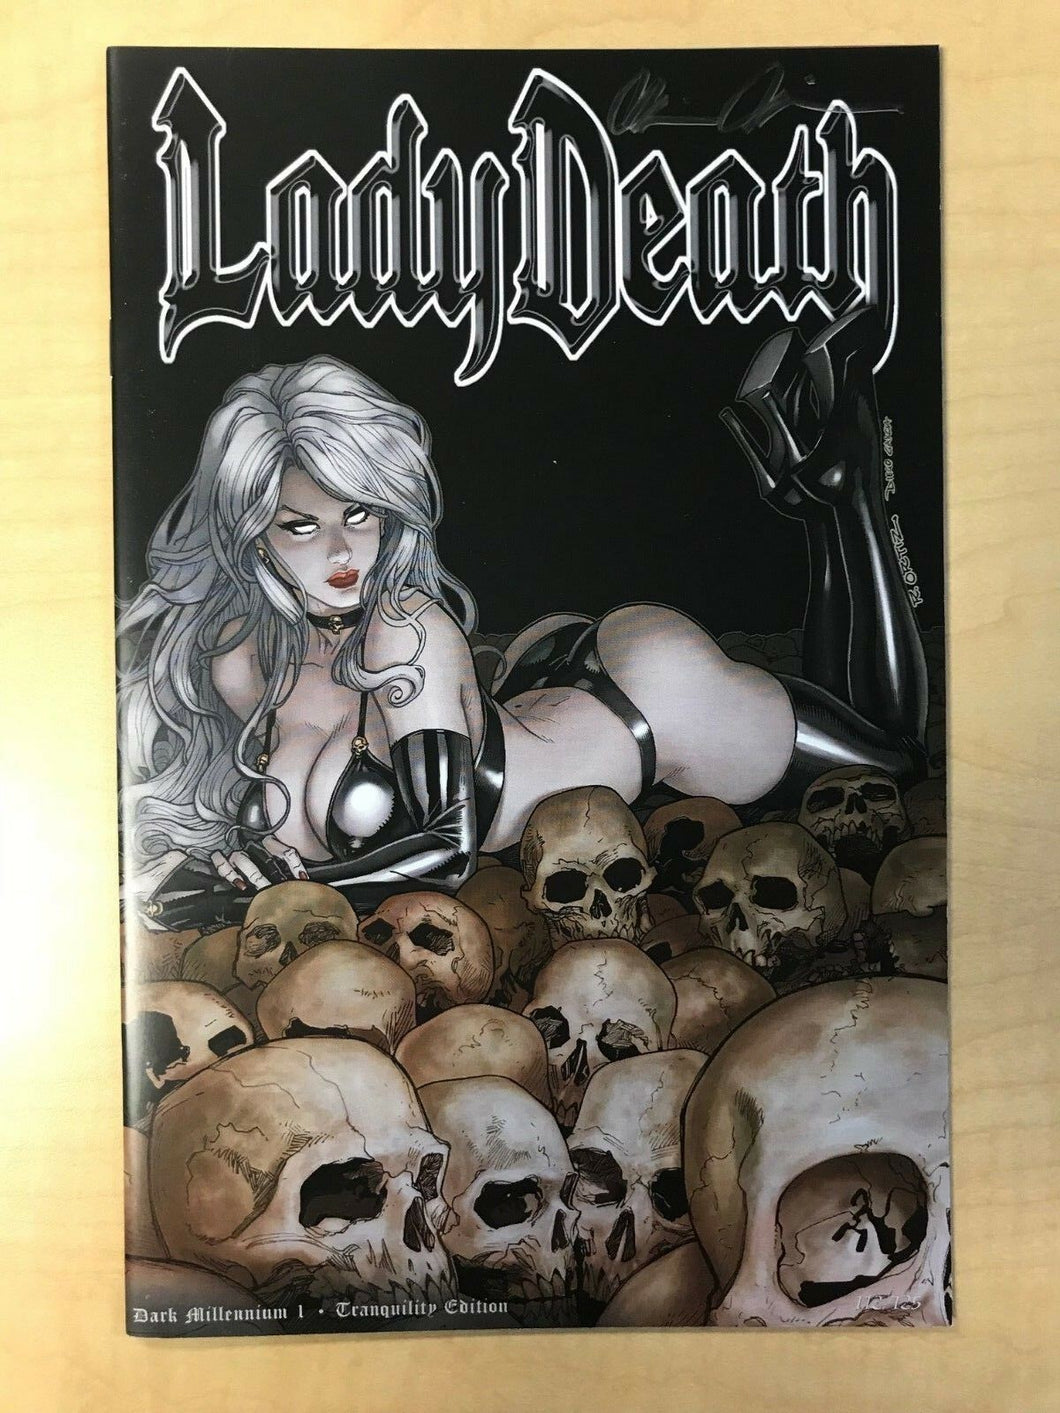 Lady Death Dark Millennium #1 Tranquility Variant Cover by Richard Ortiz Signed by Brian Pulido with a COA Limited to 125